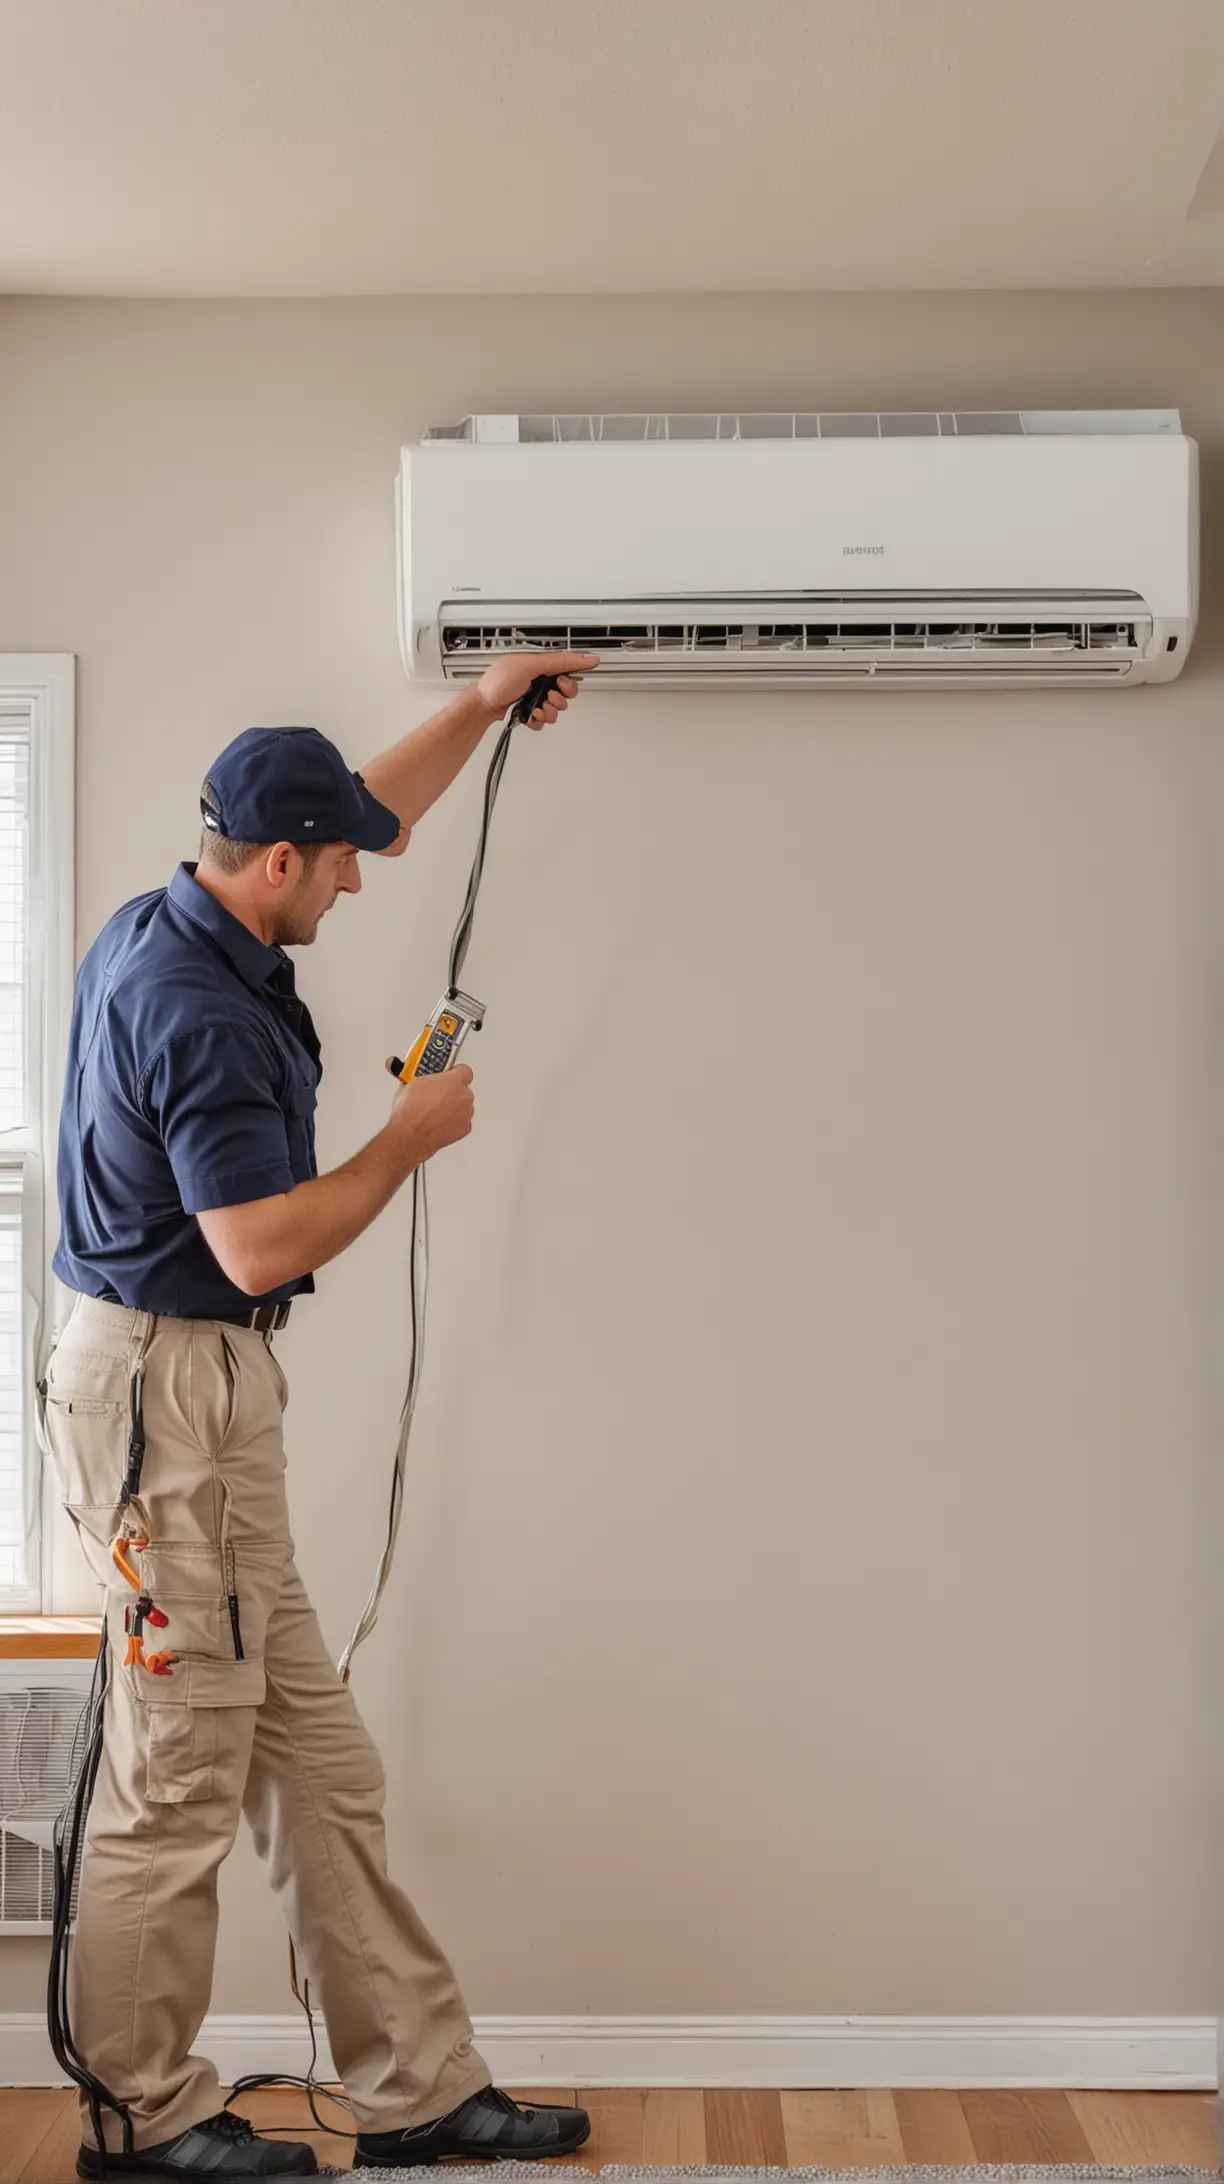 Professional Ductless Mini Split Technician Servicing AC in Modern Living Room